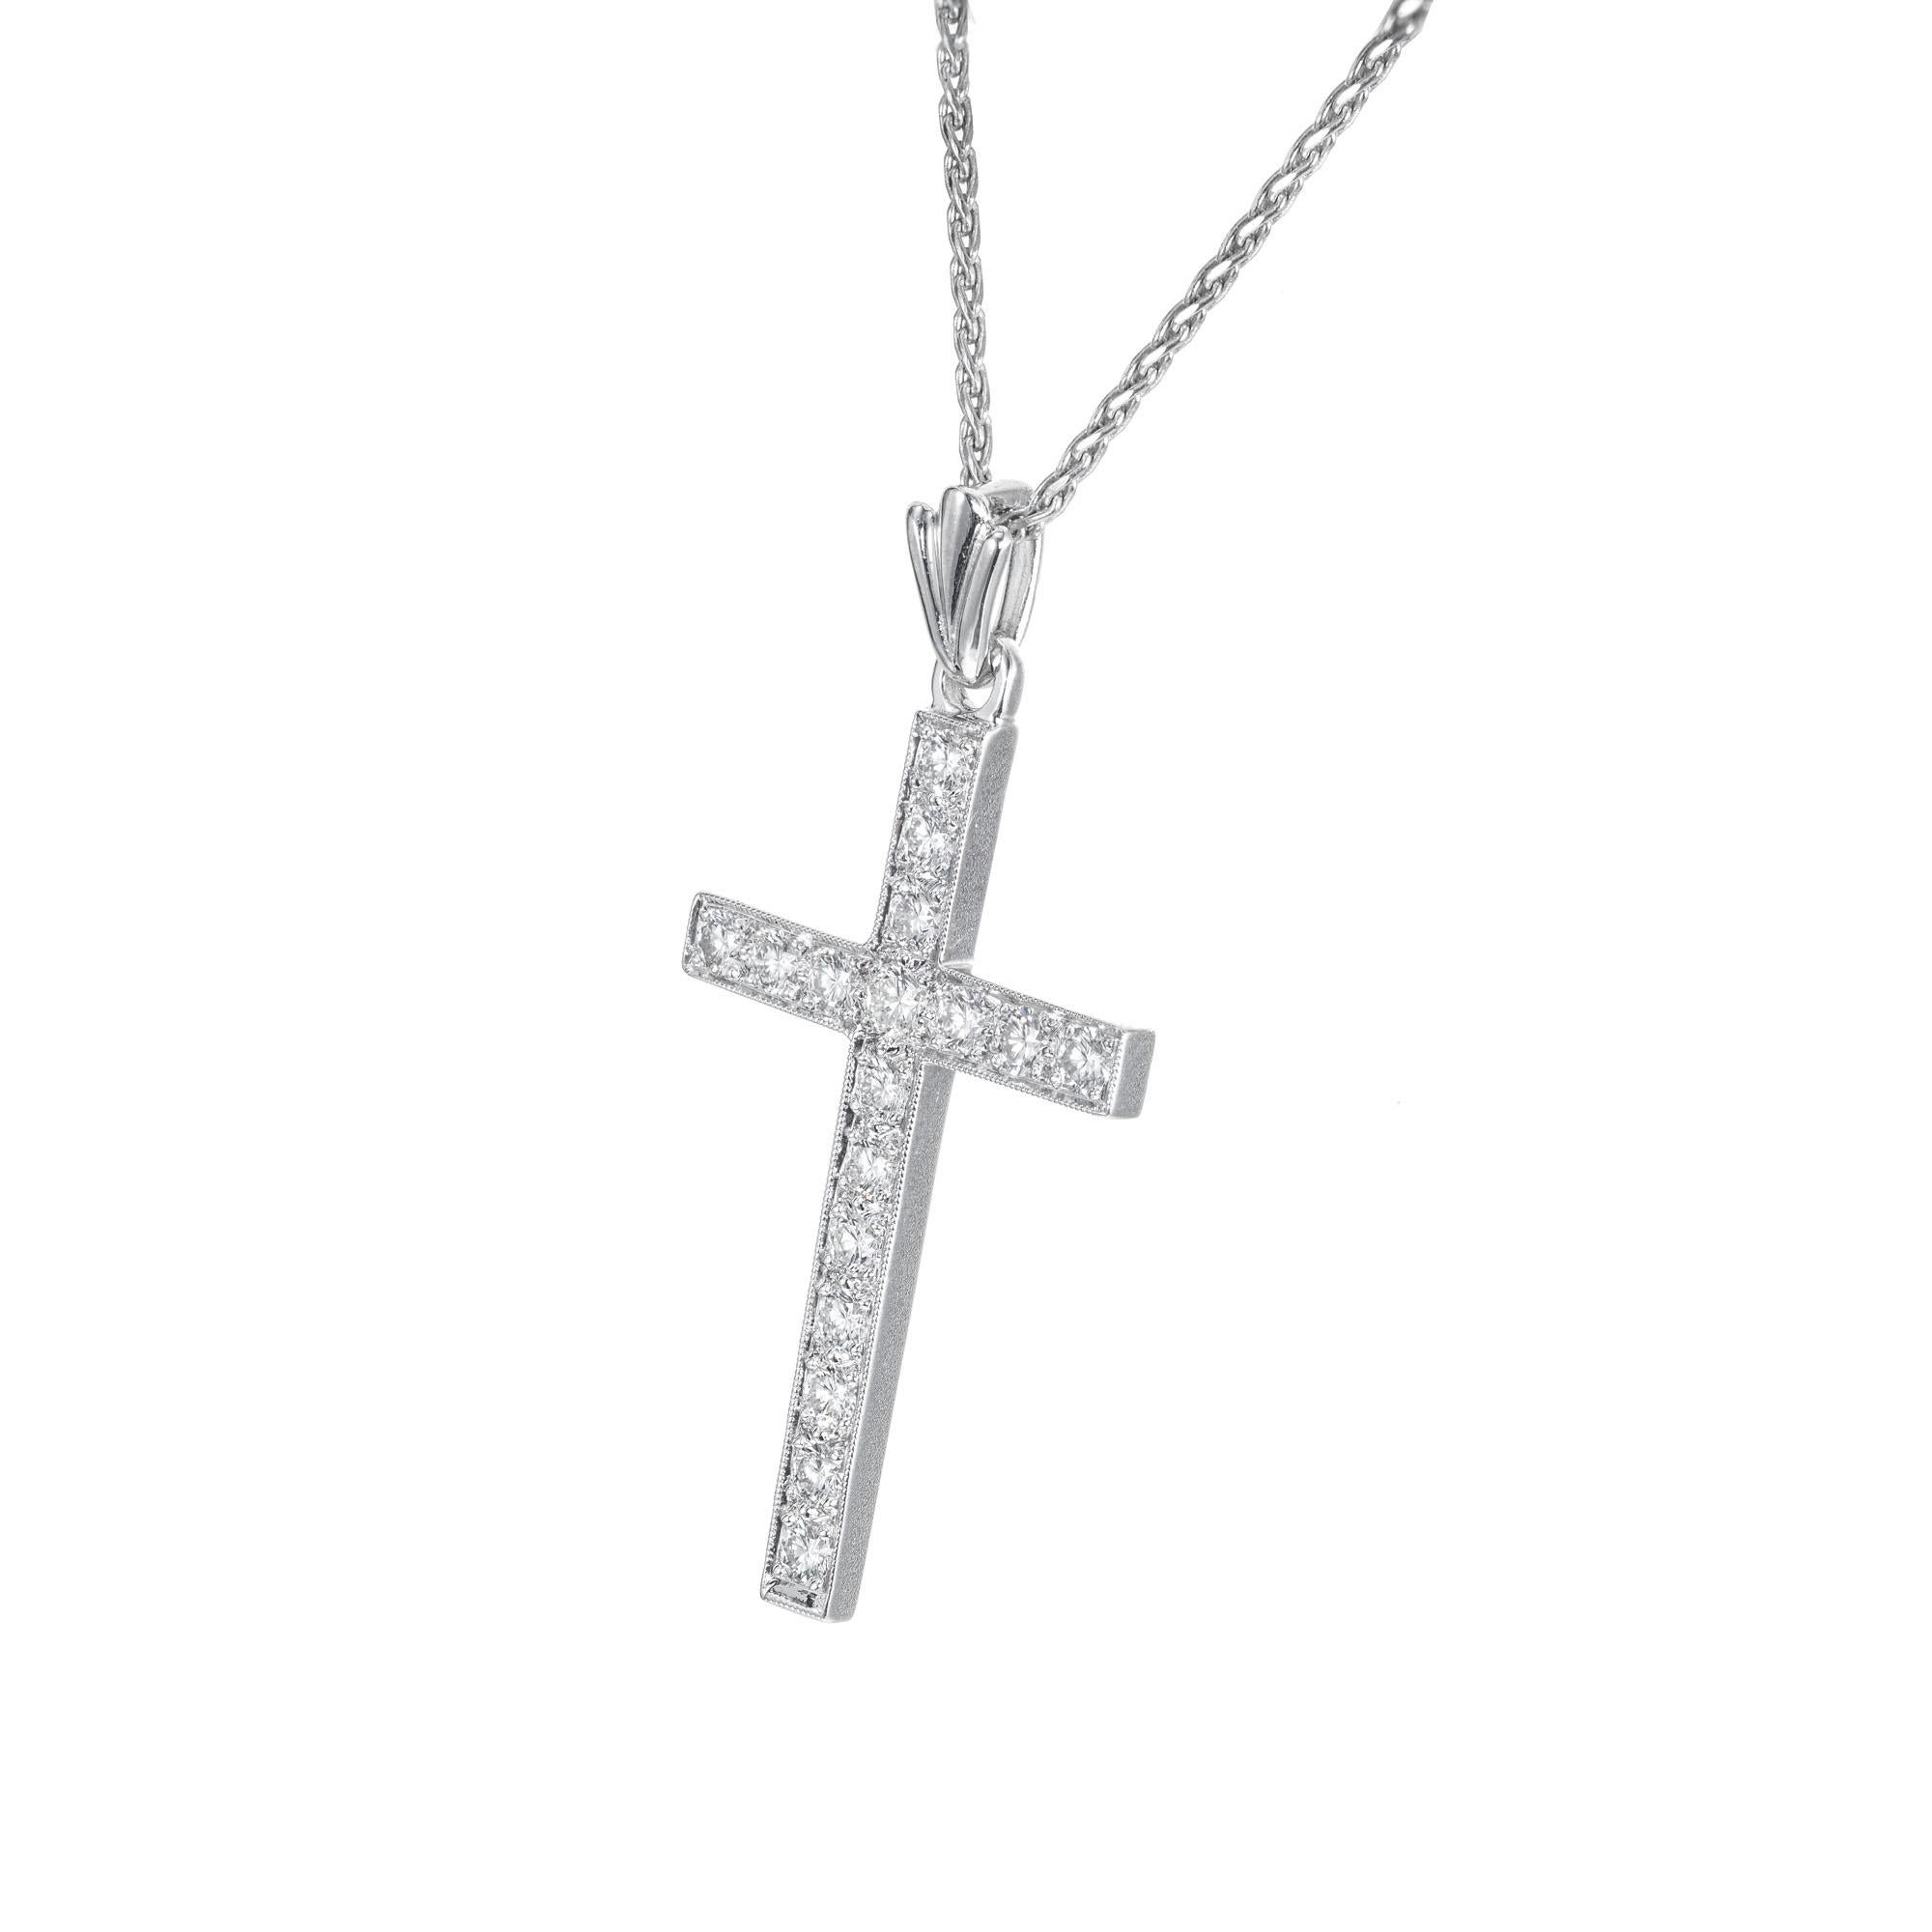 17 round brilliant cut diamond cross pendant necklace in 14k white gold on a 18 inch 14k white gold chain.  

17 round brilliant cut diamonds, .45cts 
14k white gold 
Stamped: 14KT
6.0 grams
Top to bottom: 34.9mm or 1 1/3 Inch
Width: 17mm or 5/8